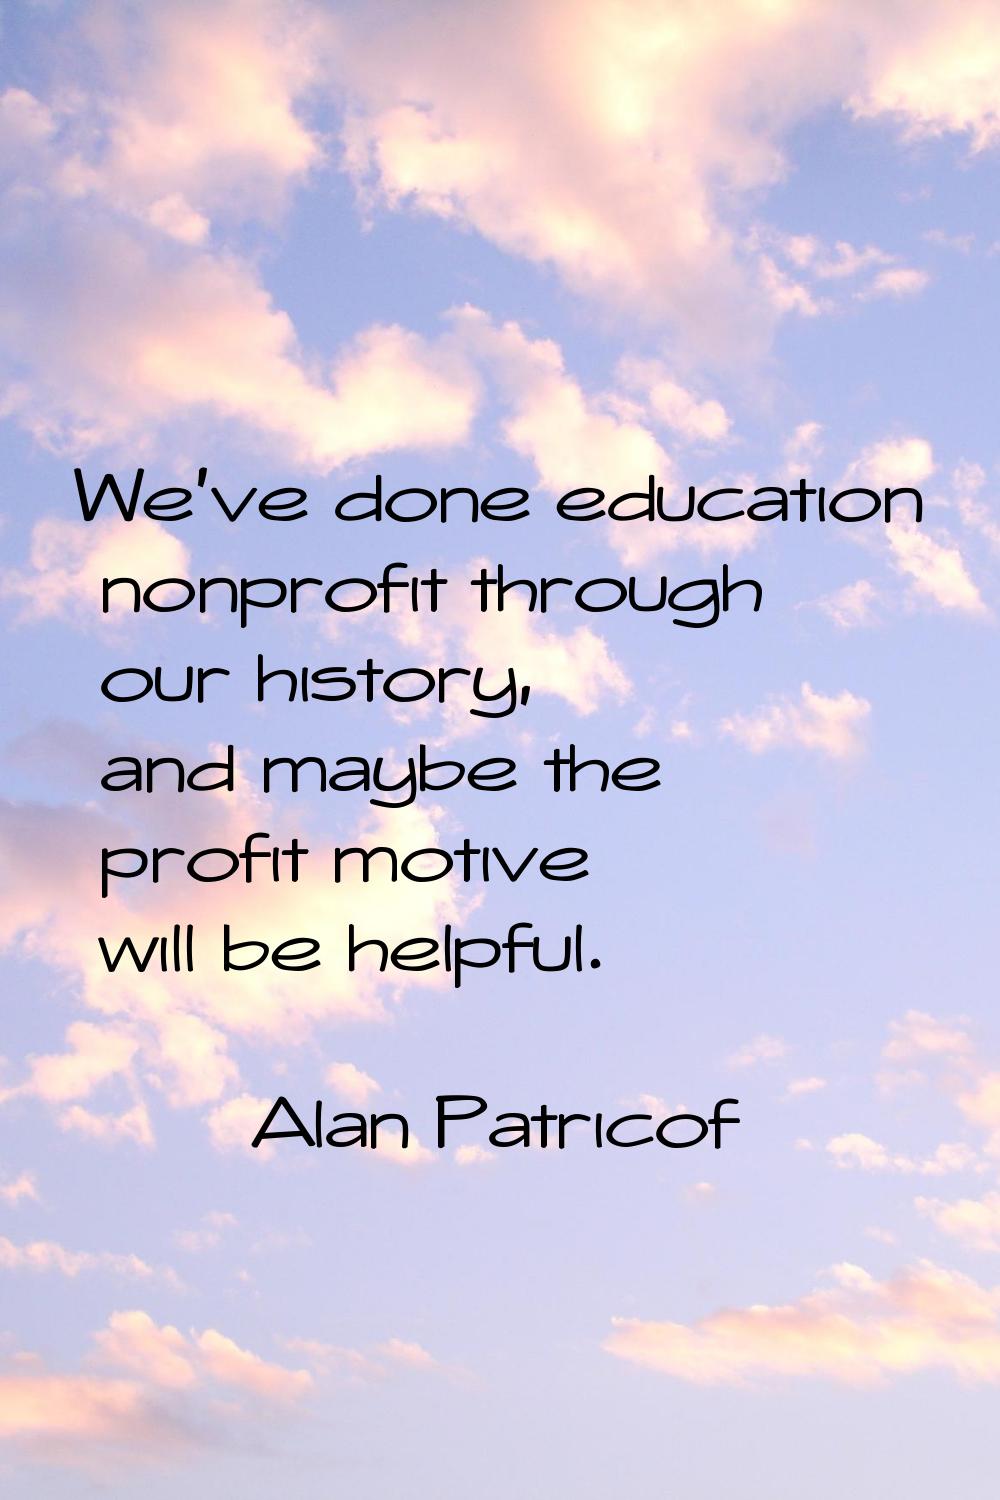 We've done education nonprofit through our history, and maybe the profit motive will be helpful.